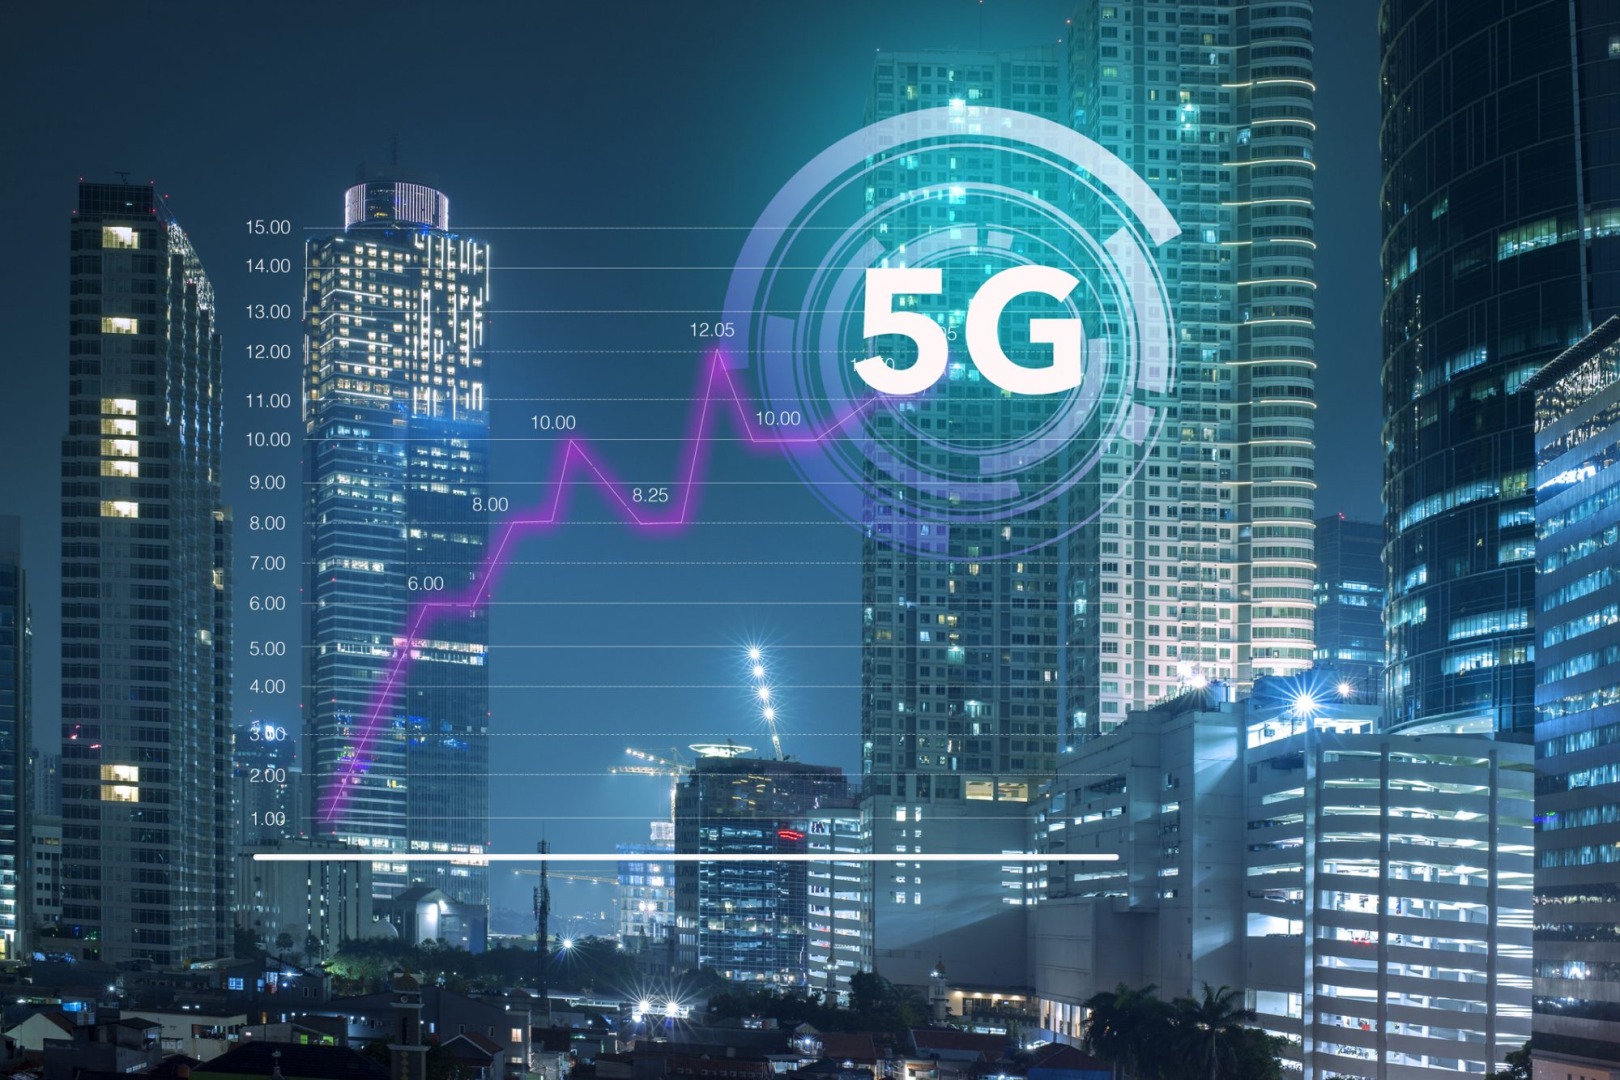 The Role of 5G in Enabling the Next Generation of Smart Cities